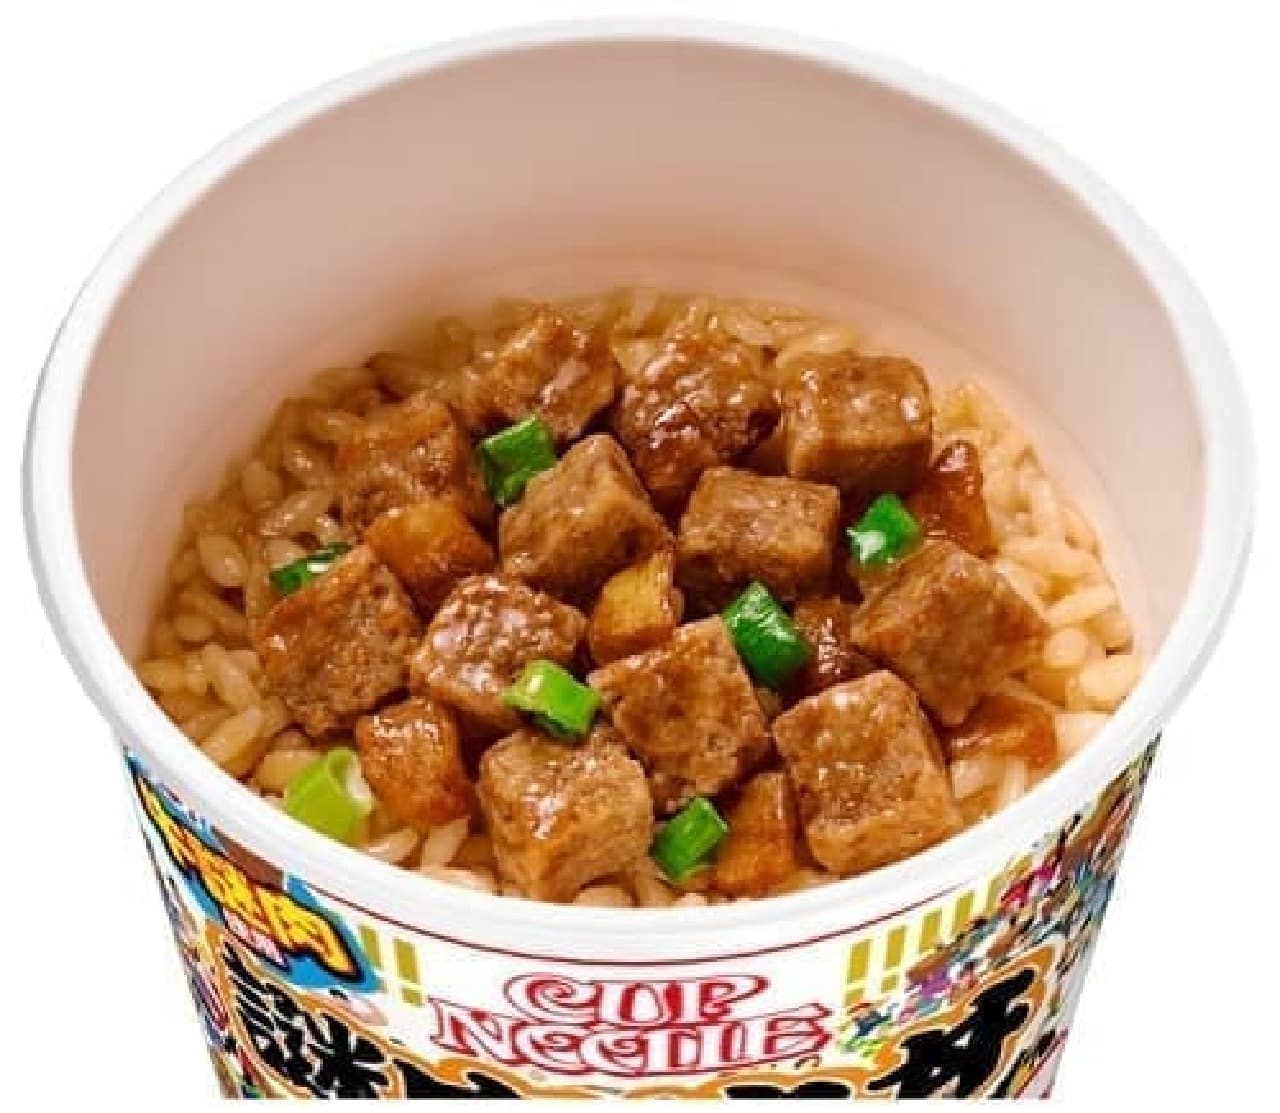 Nissin Foods "Cup Noodle Mysterious Beef Bowl"